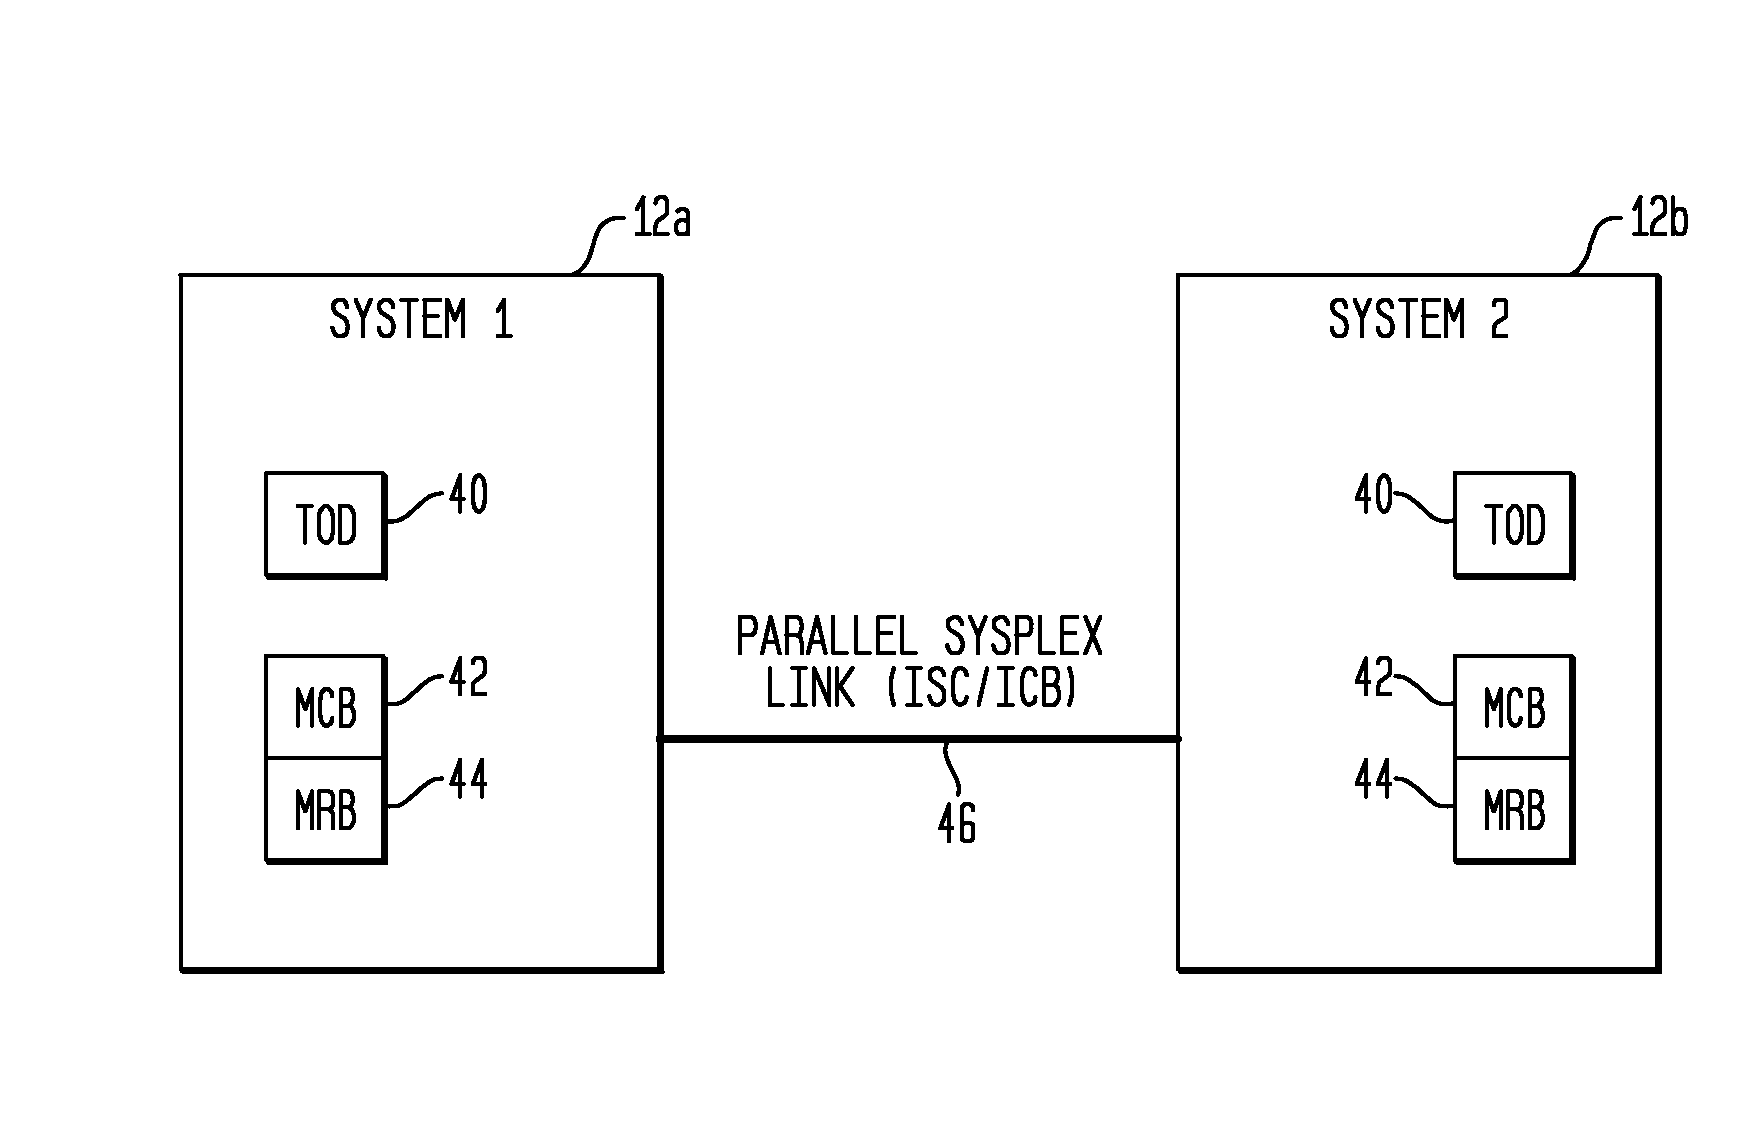 Method and system for time synchronization among systems using parallel sysplex links